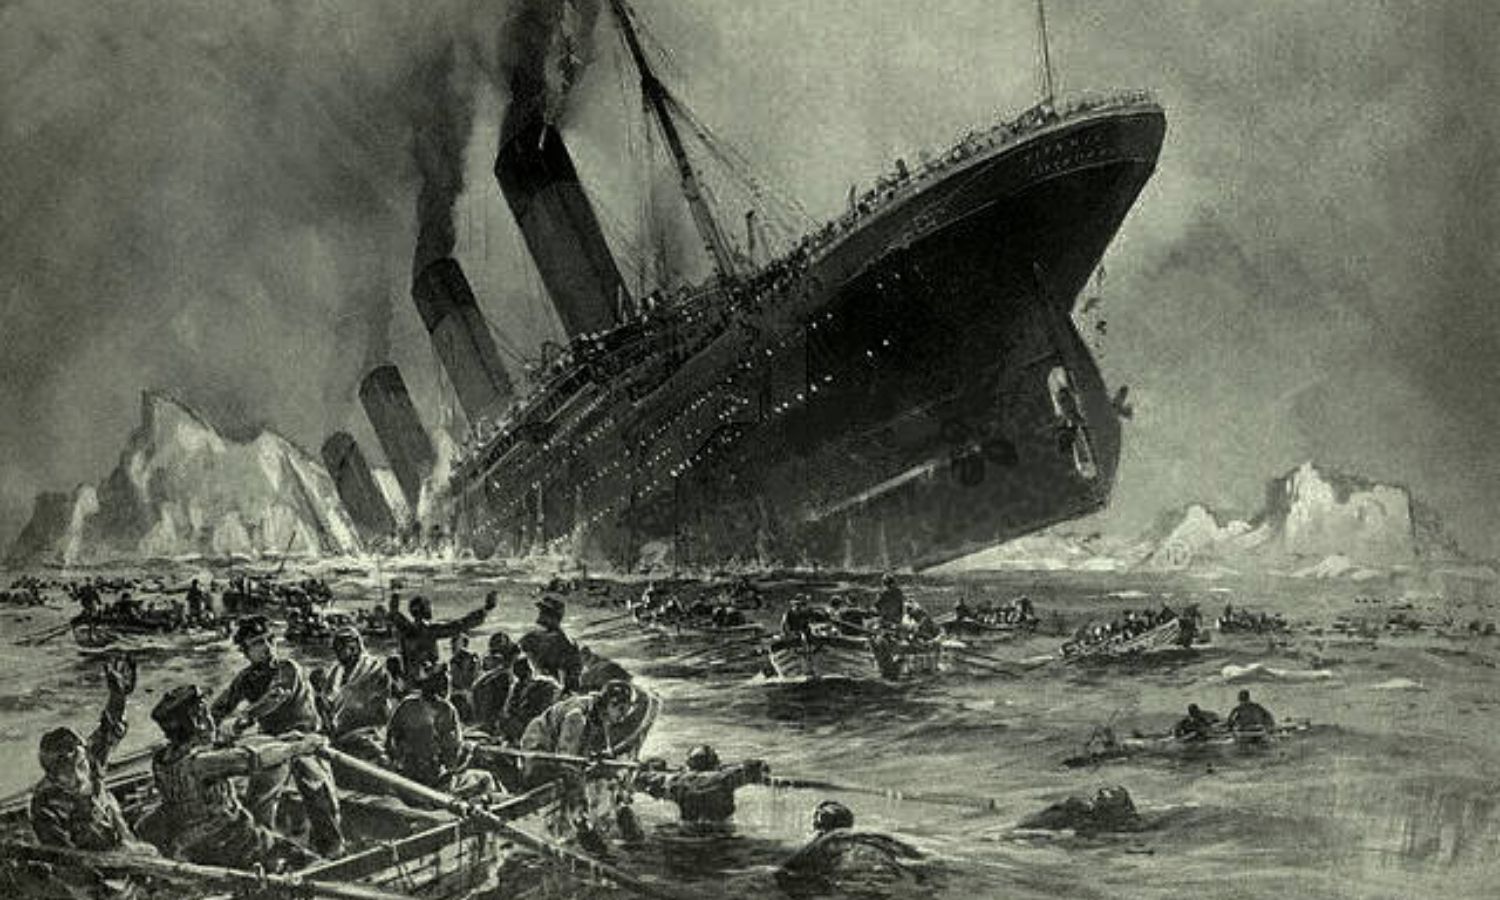 OTD in 1912: The Titanic sunk at 2:20 am in the North Atlantic Ocean off the coast of Newfoundland.